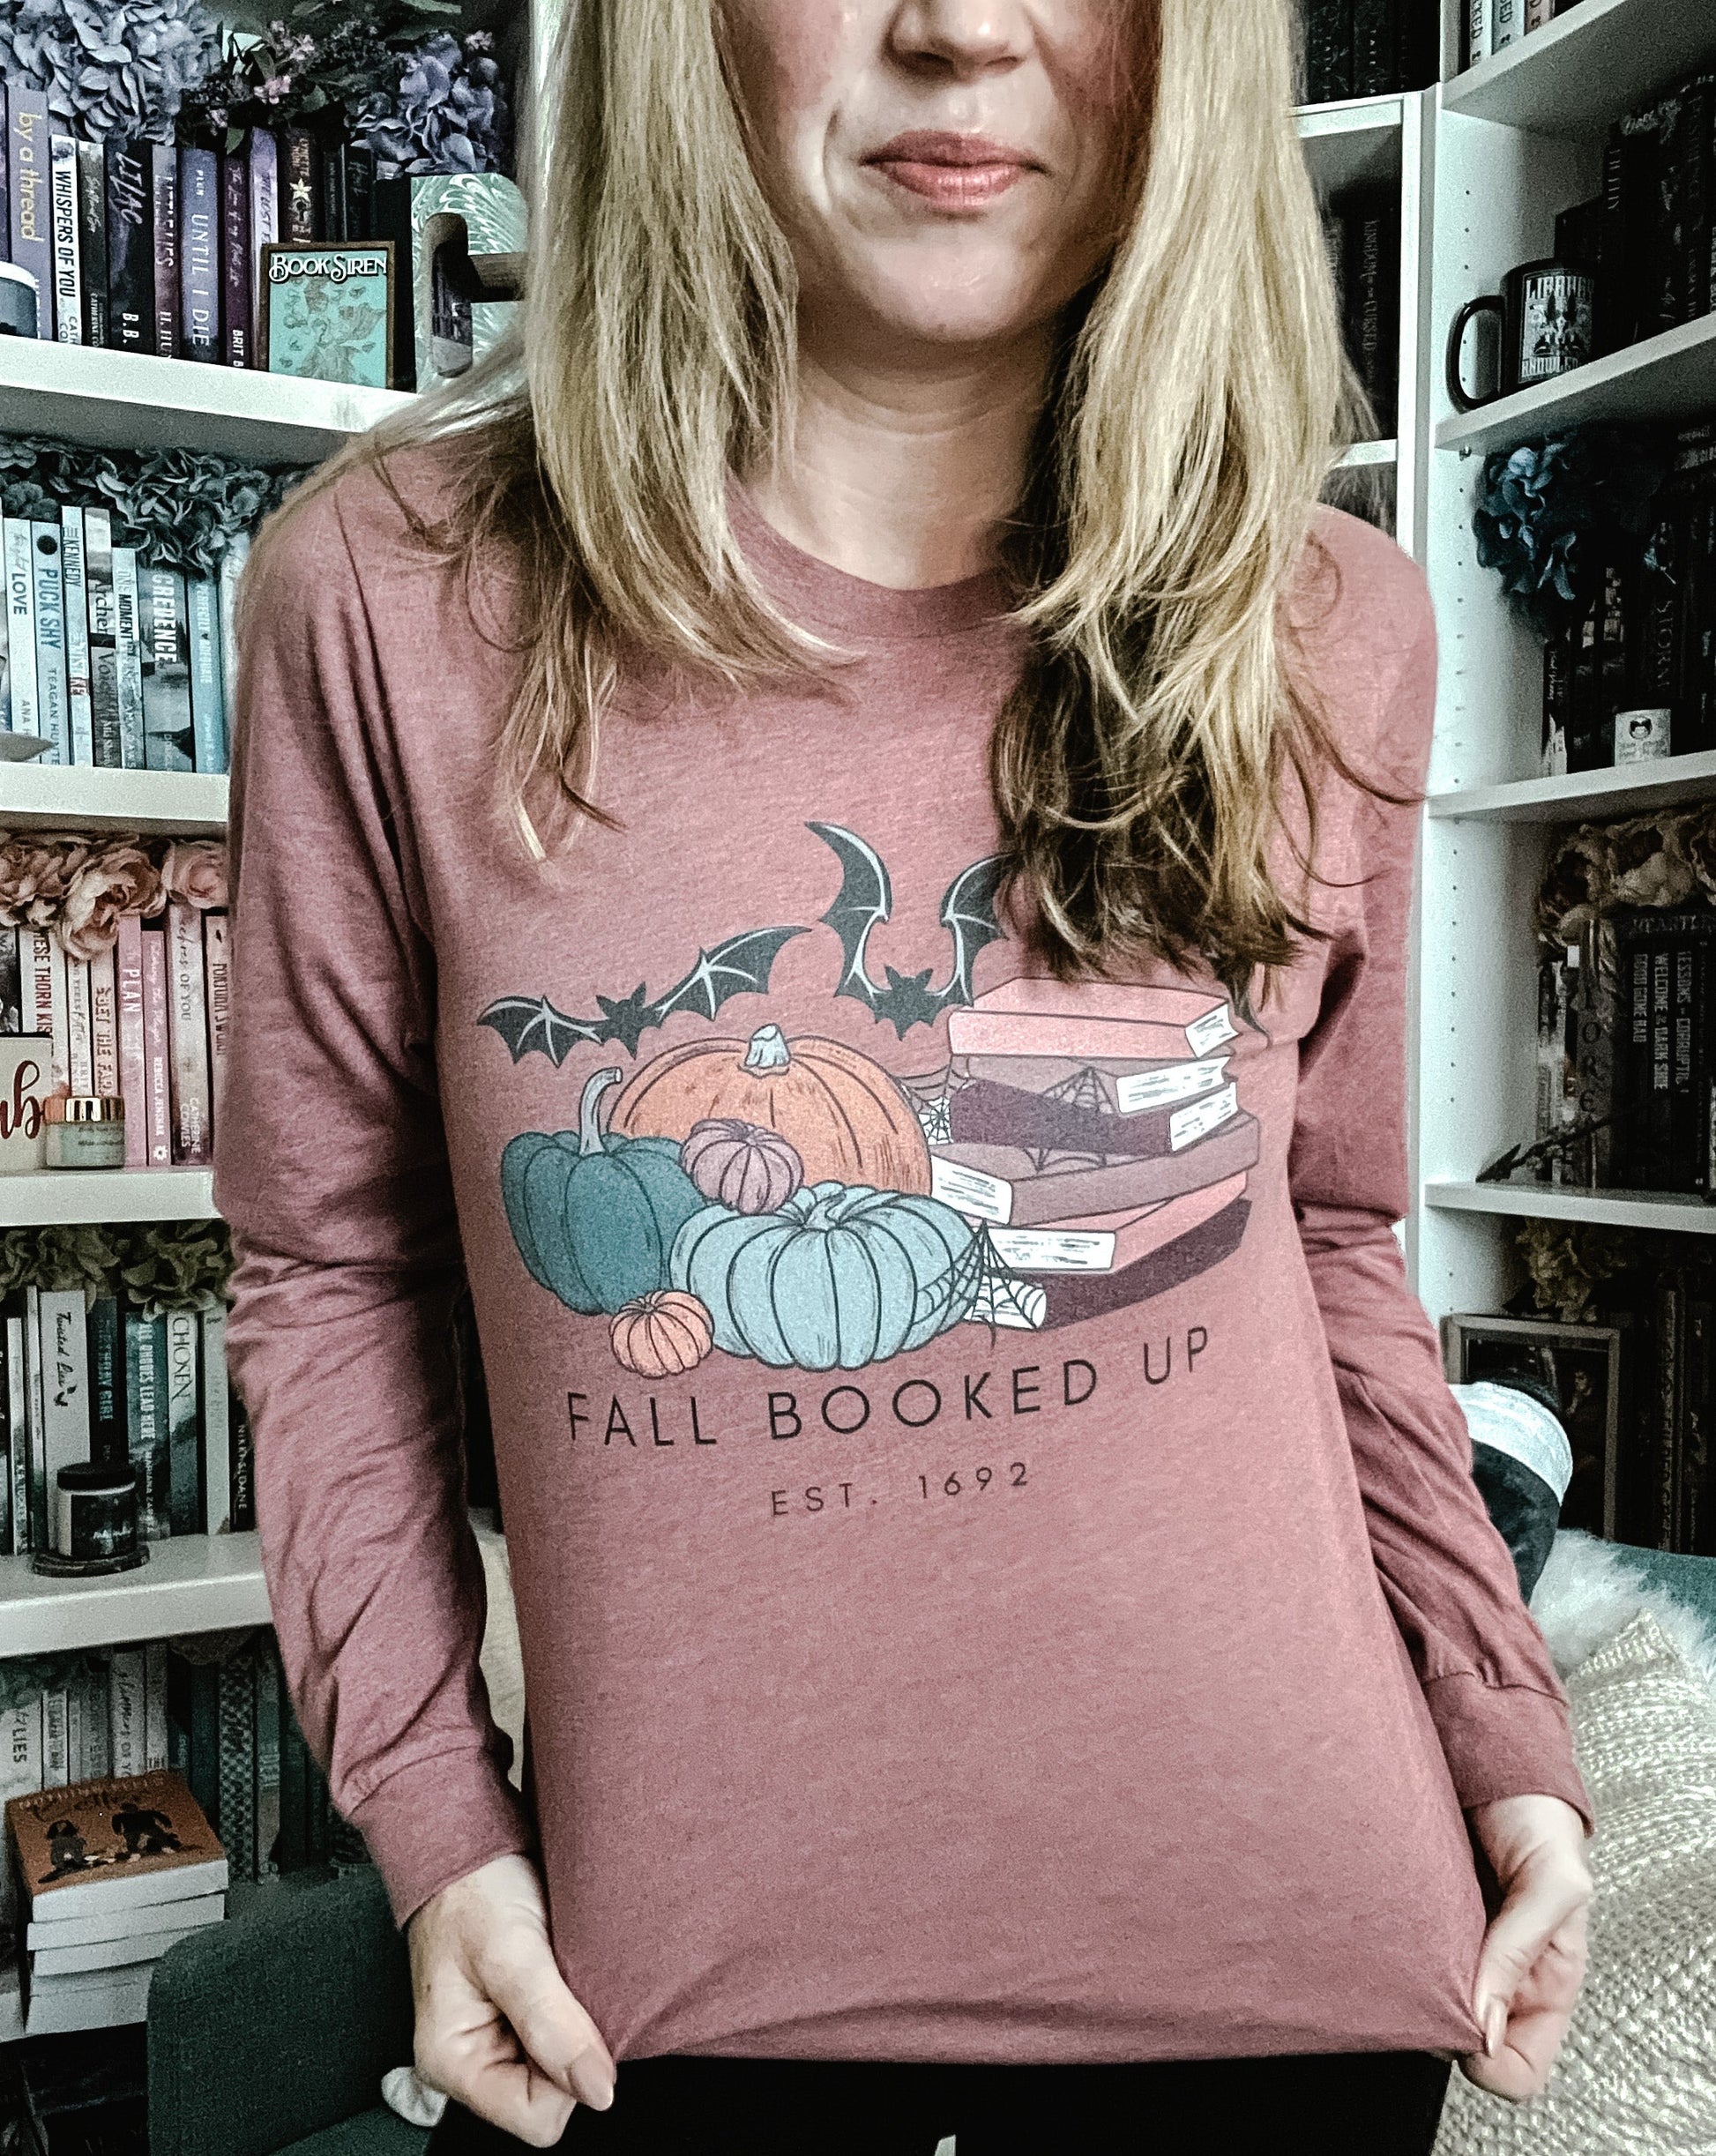 Fall Booked Up Unisex Long Sleeve Tee - Multicolor Books for FireDrake Artistry Photo by @themommabookclub